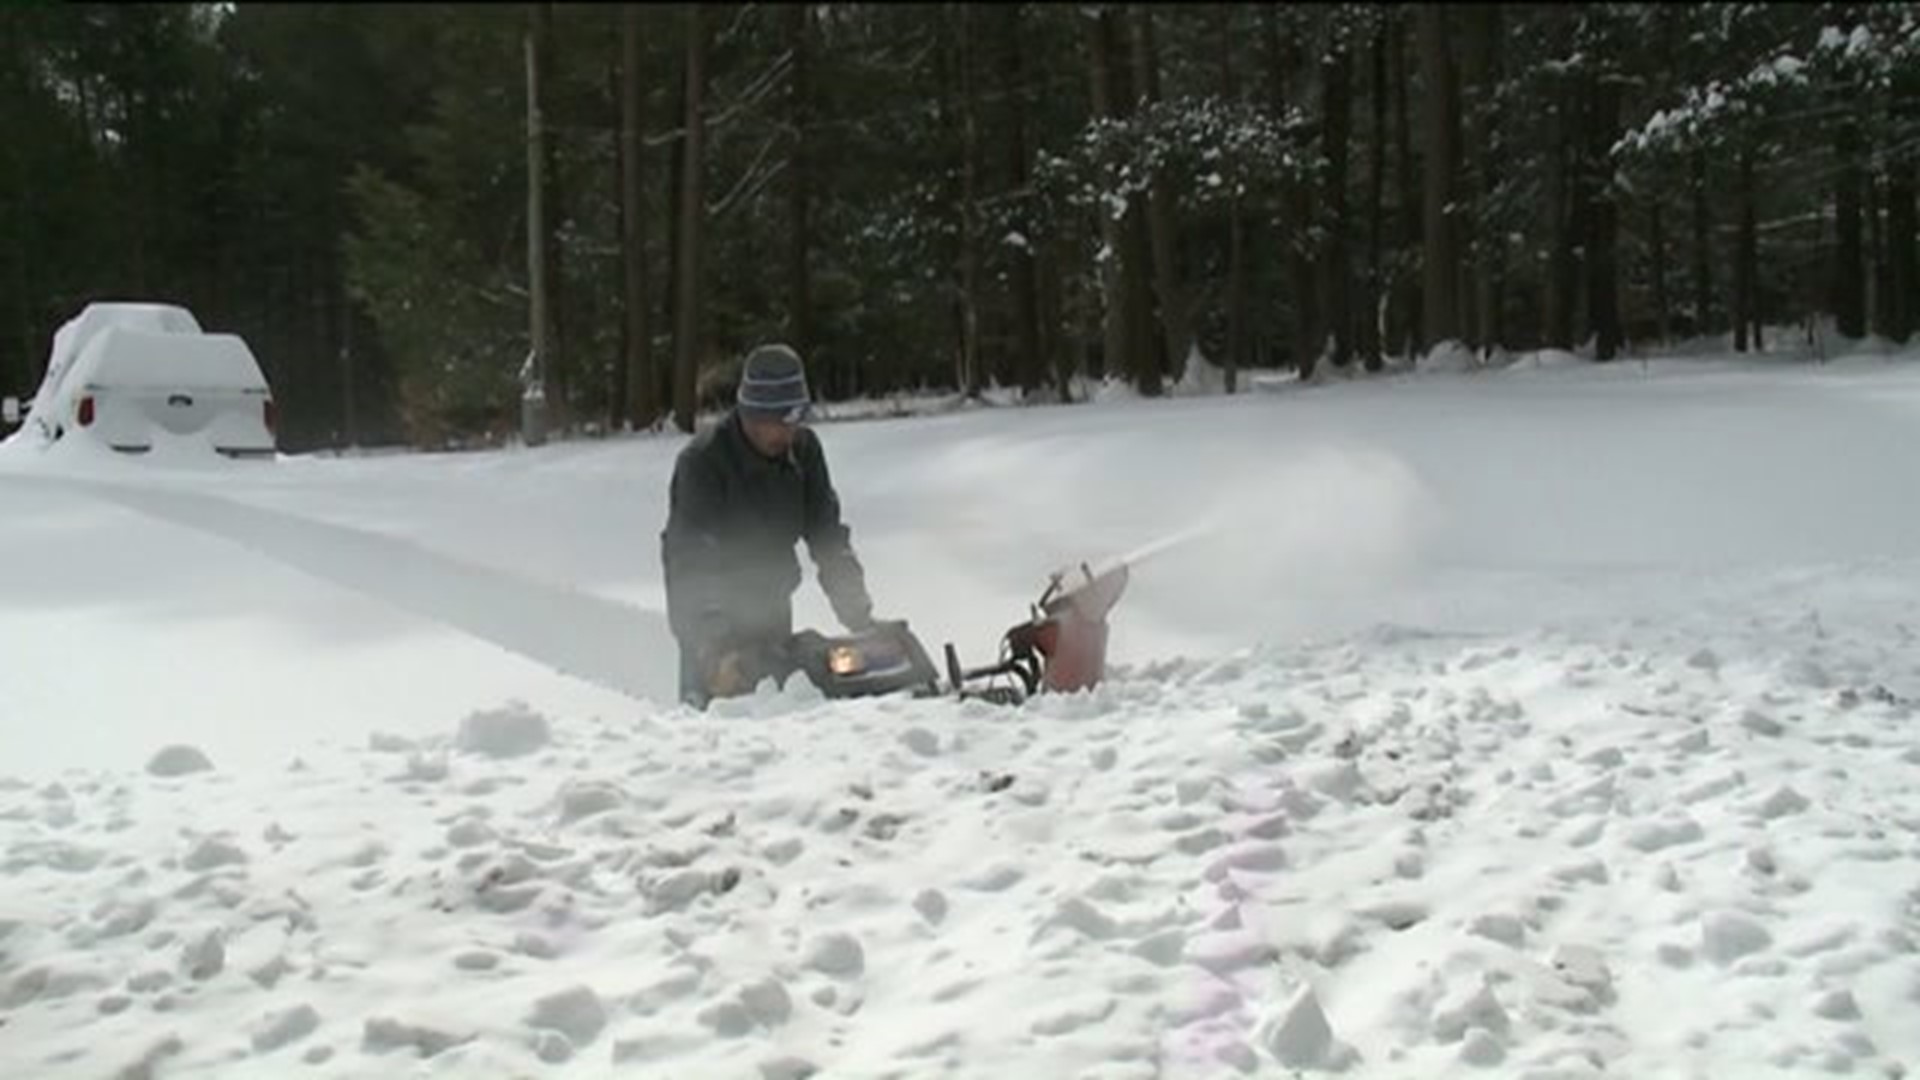 Damascus Township Buried Under 30" of Snow